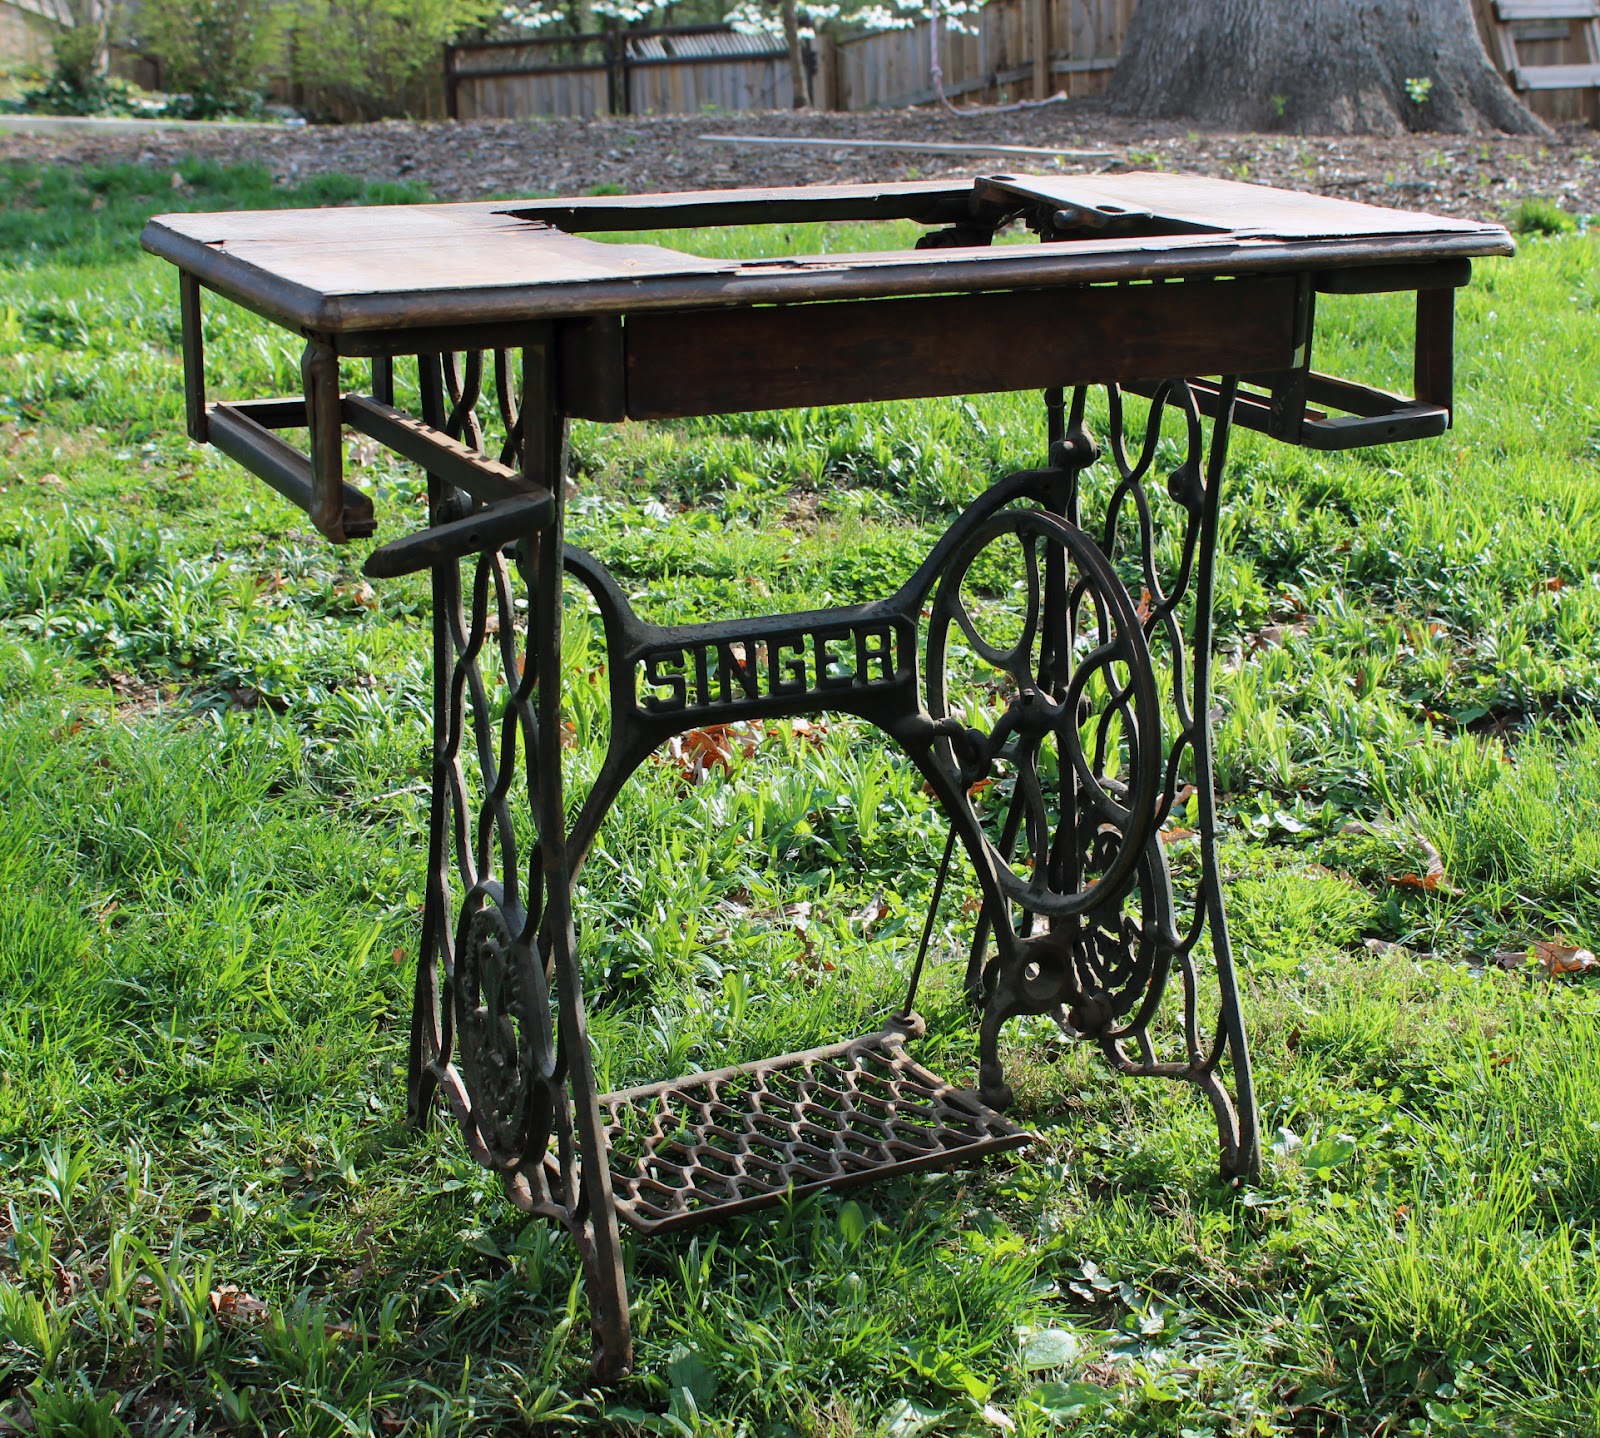 A Sewing Life: Treadle Turned Ironing Station